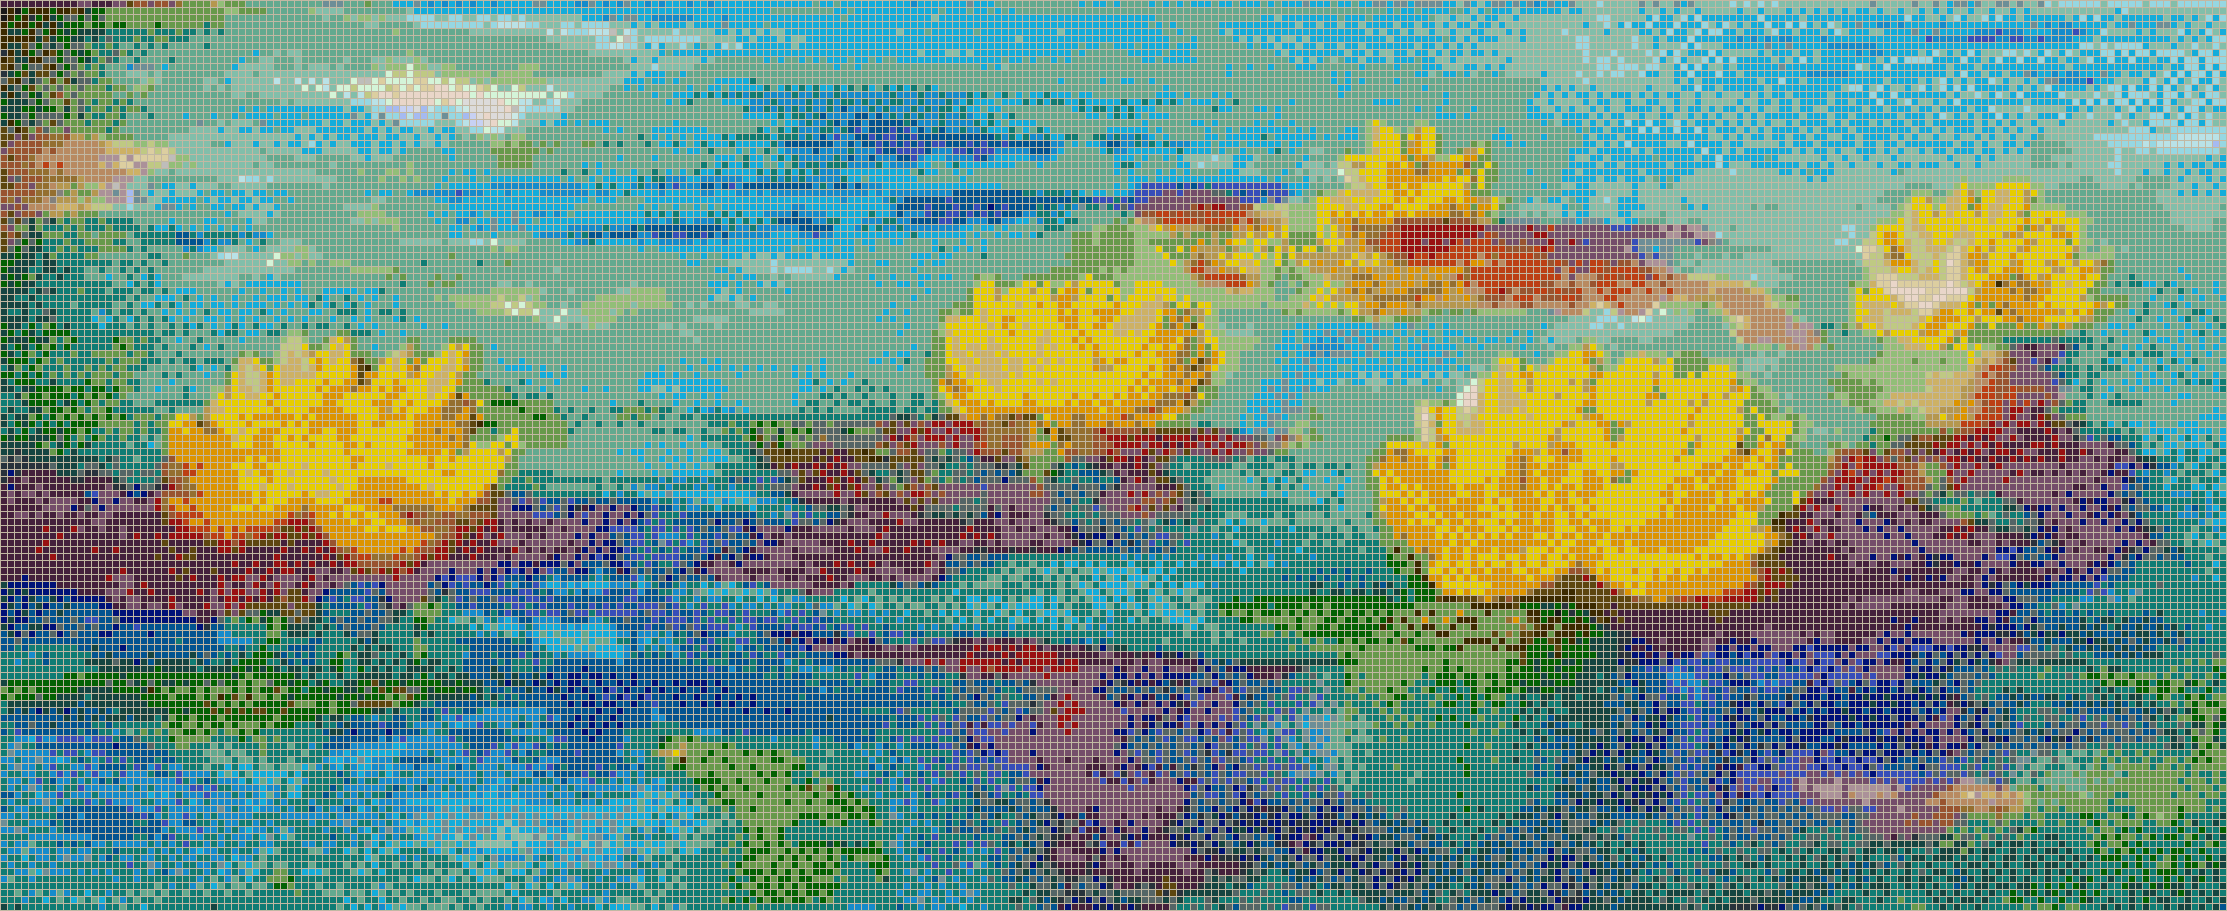 Serene Water Lillies - Mosaic Tile Picture Art